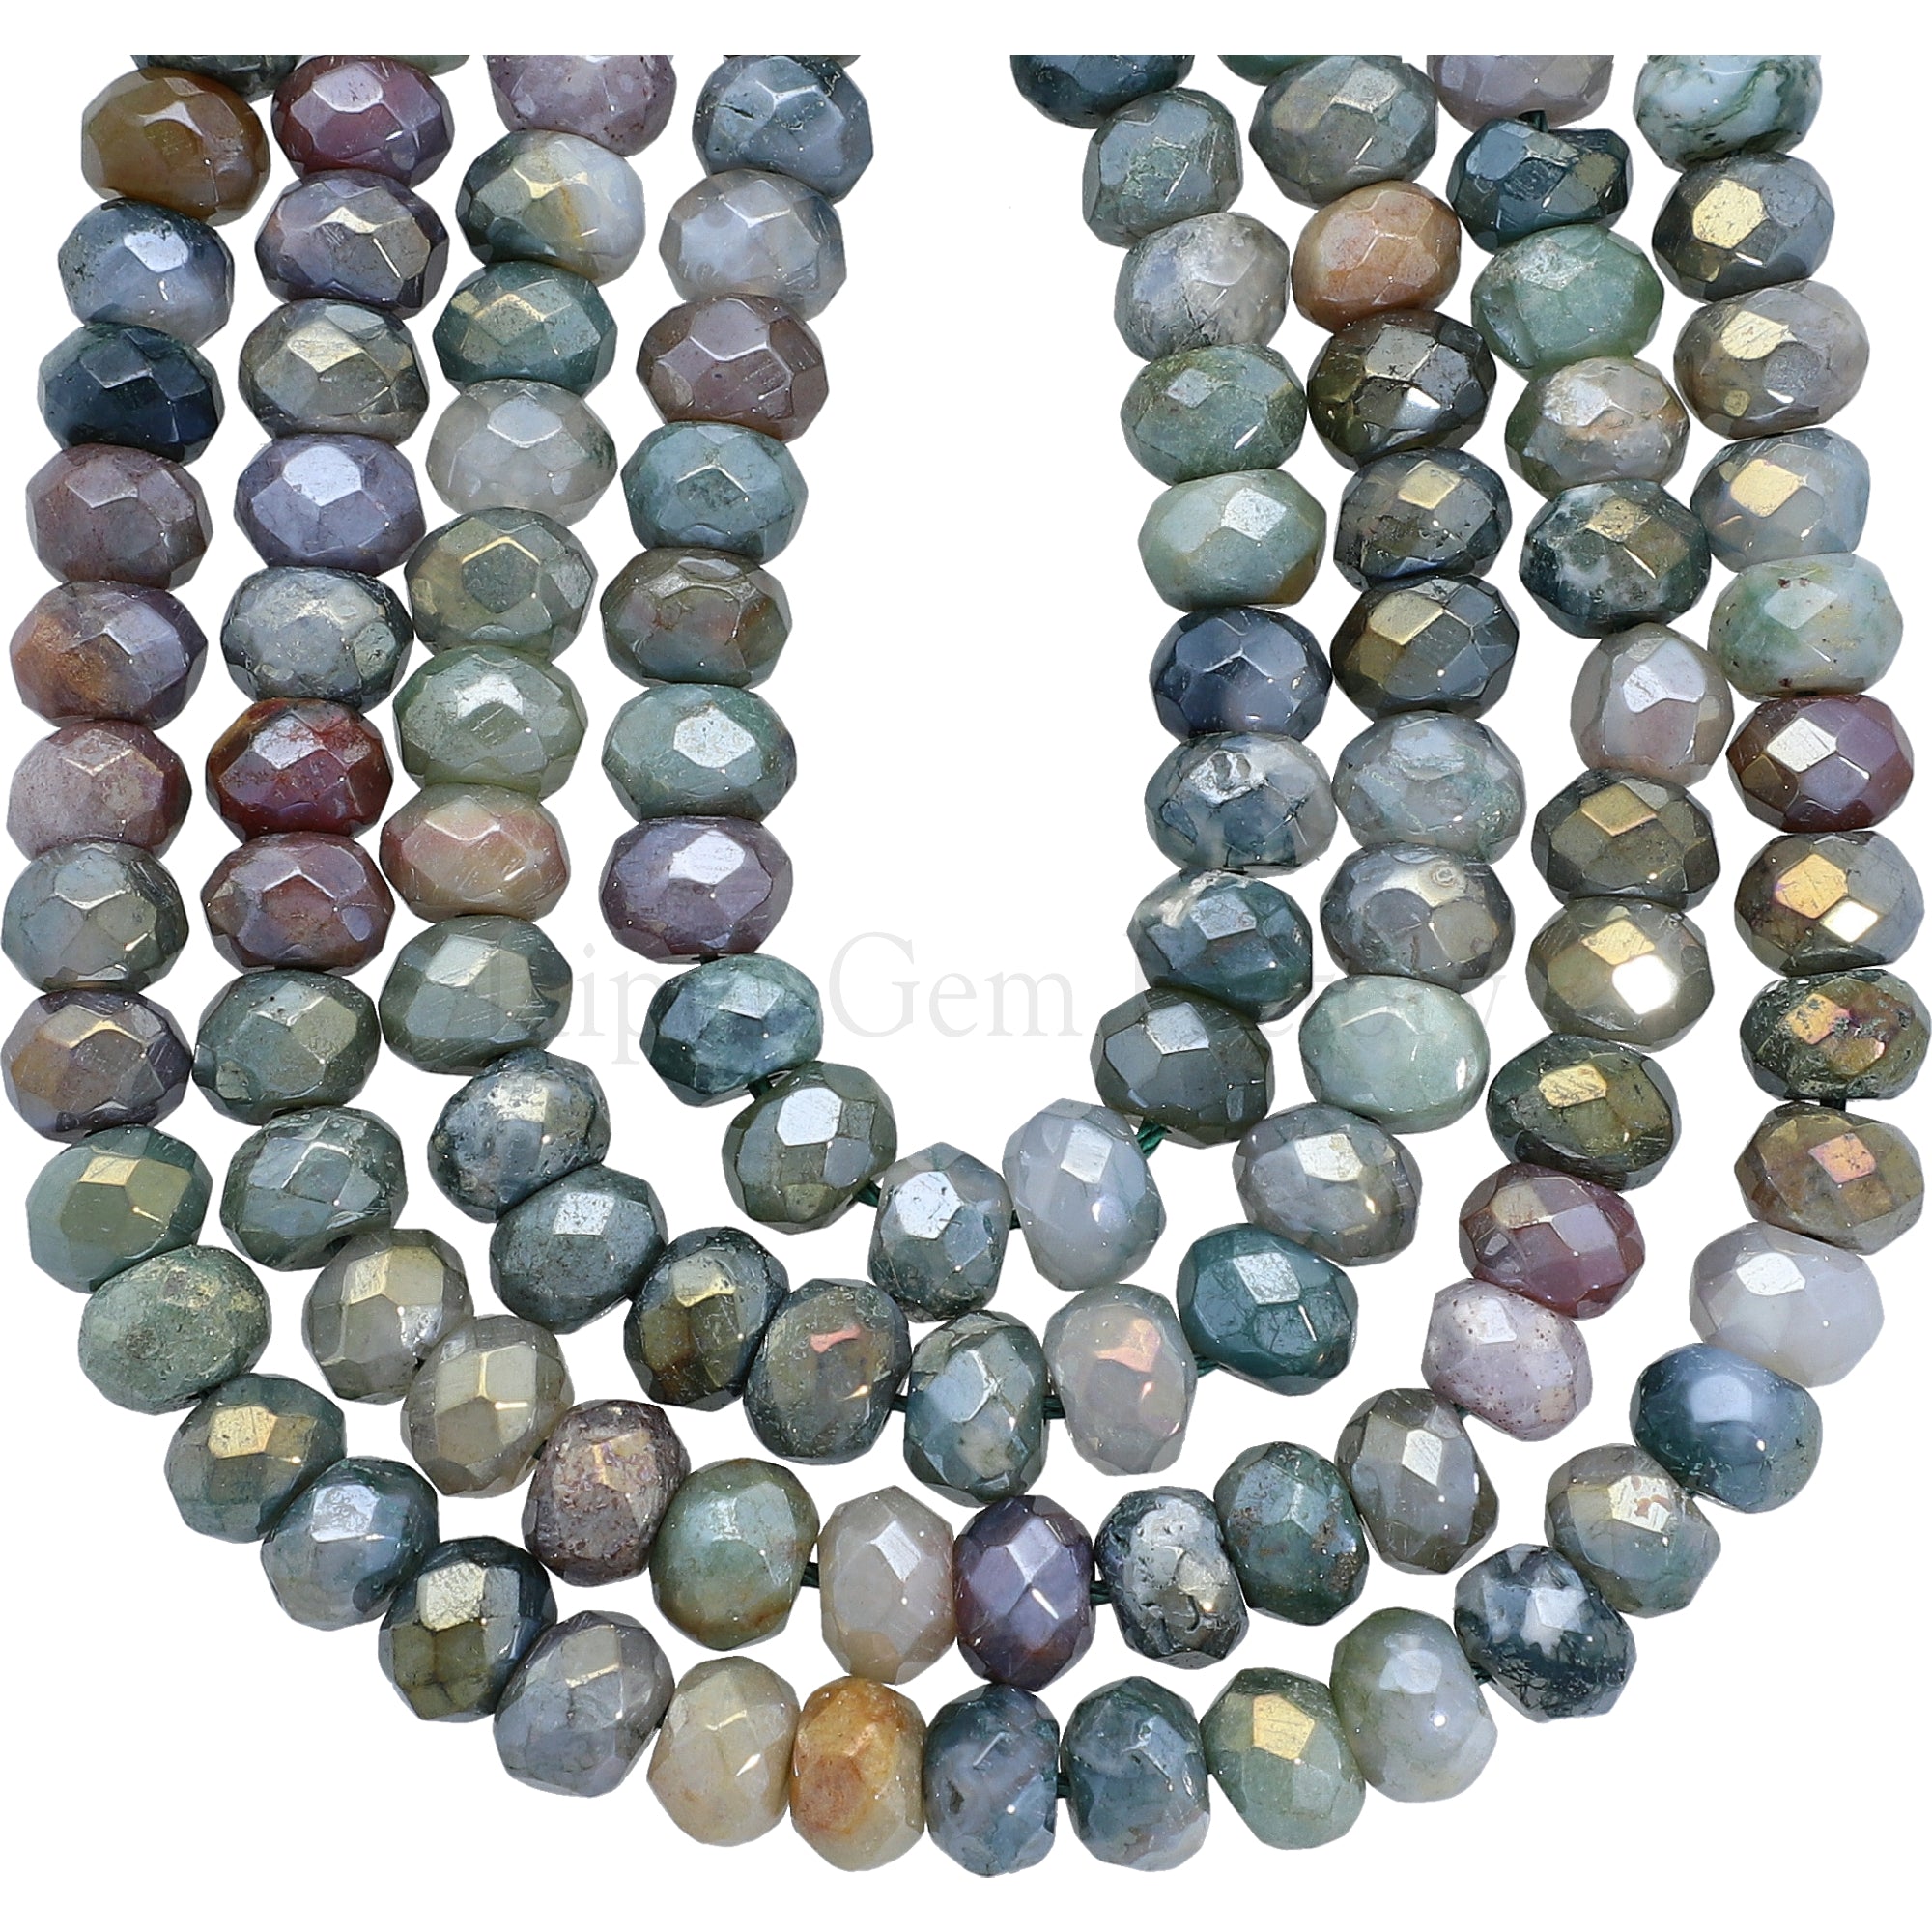 8 MM Mystic Coated Jasper Faceted Rondelle Beads 15 Inches Strand